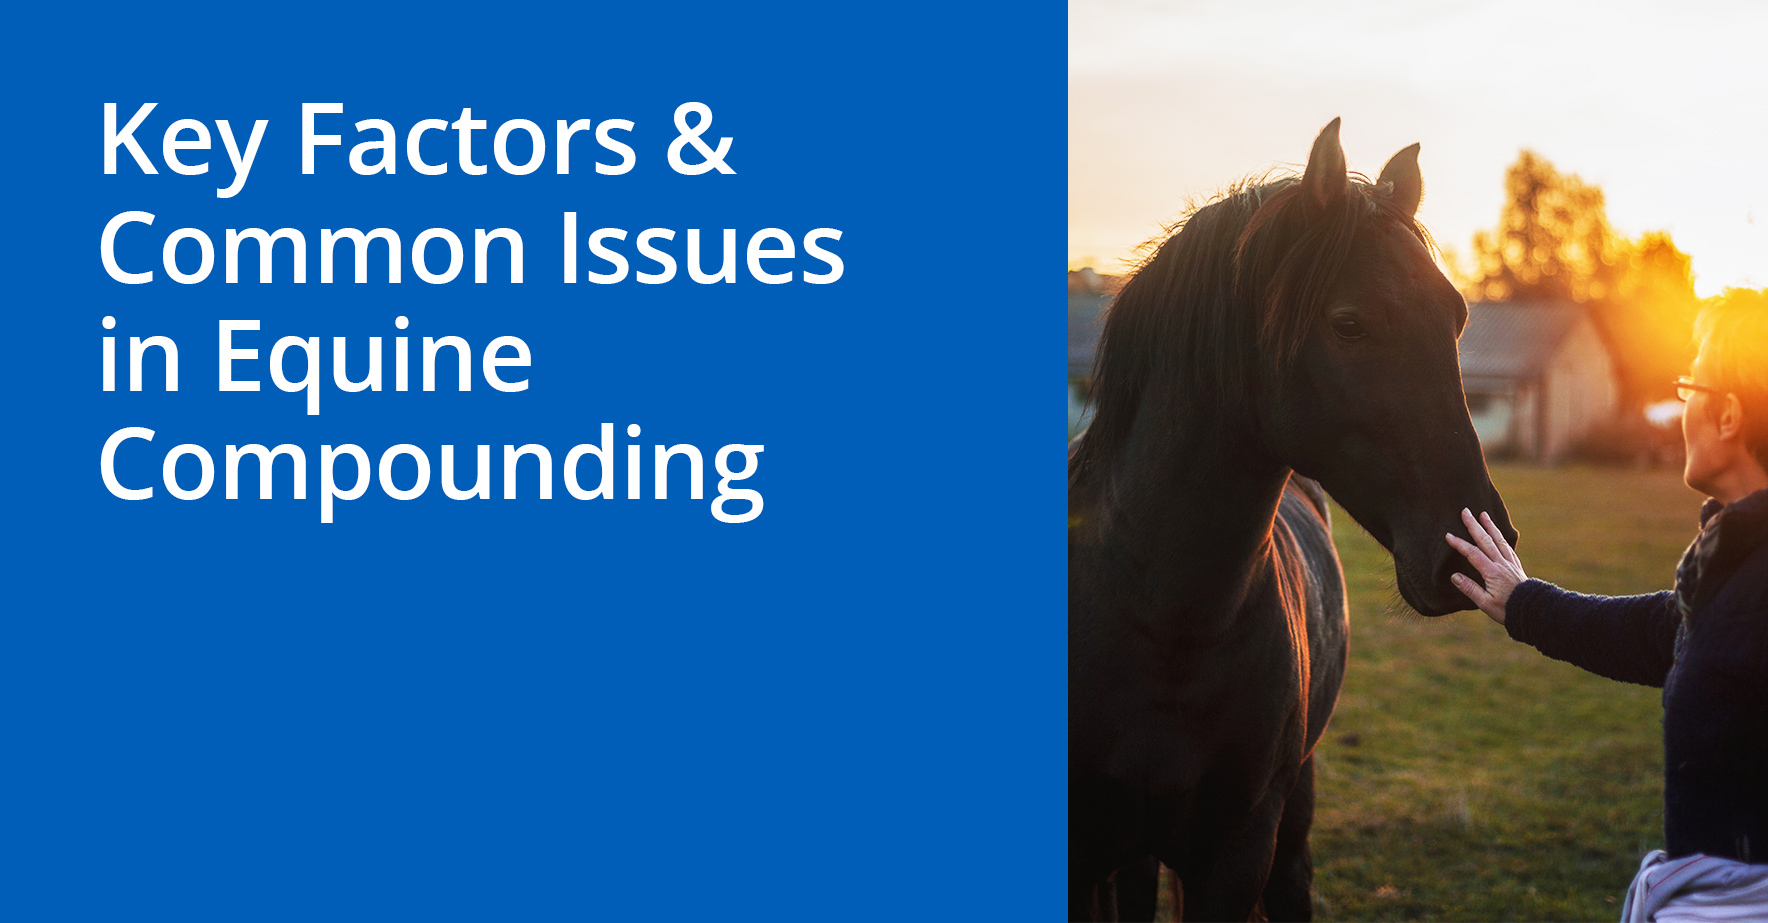 Key_Factors_and_Common_Issues_in_Equine_Compounding.jpg